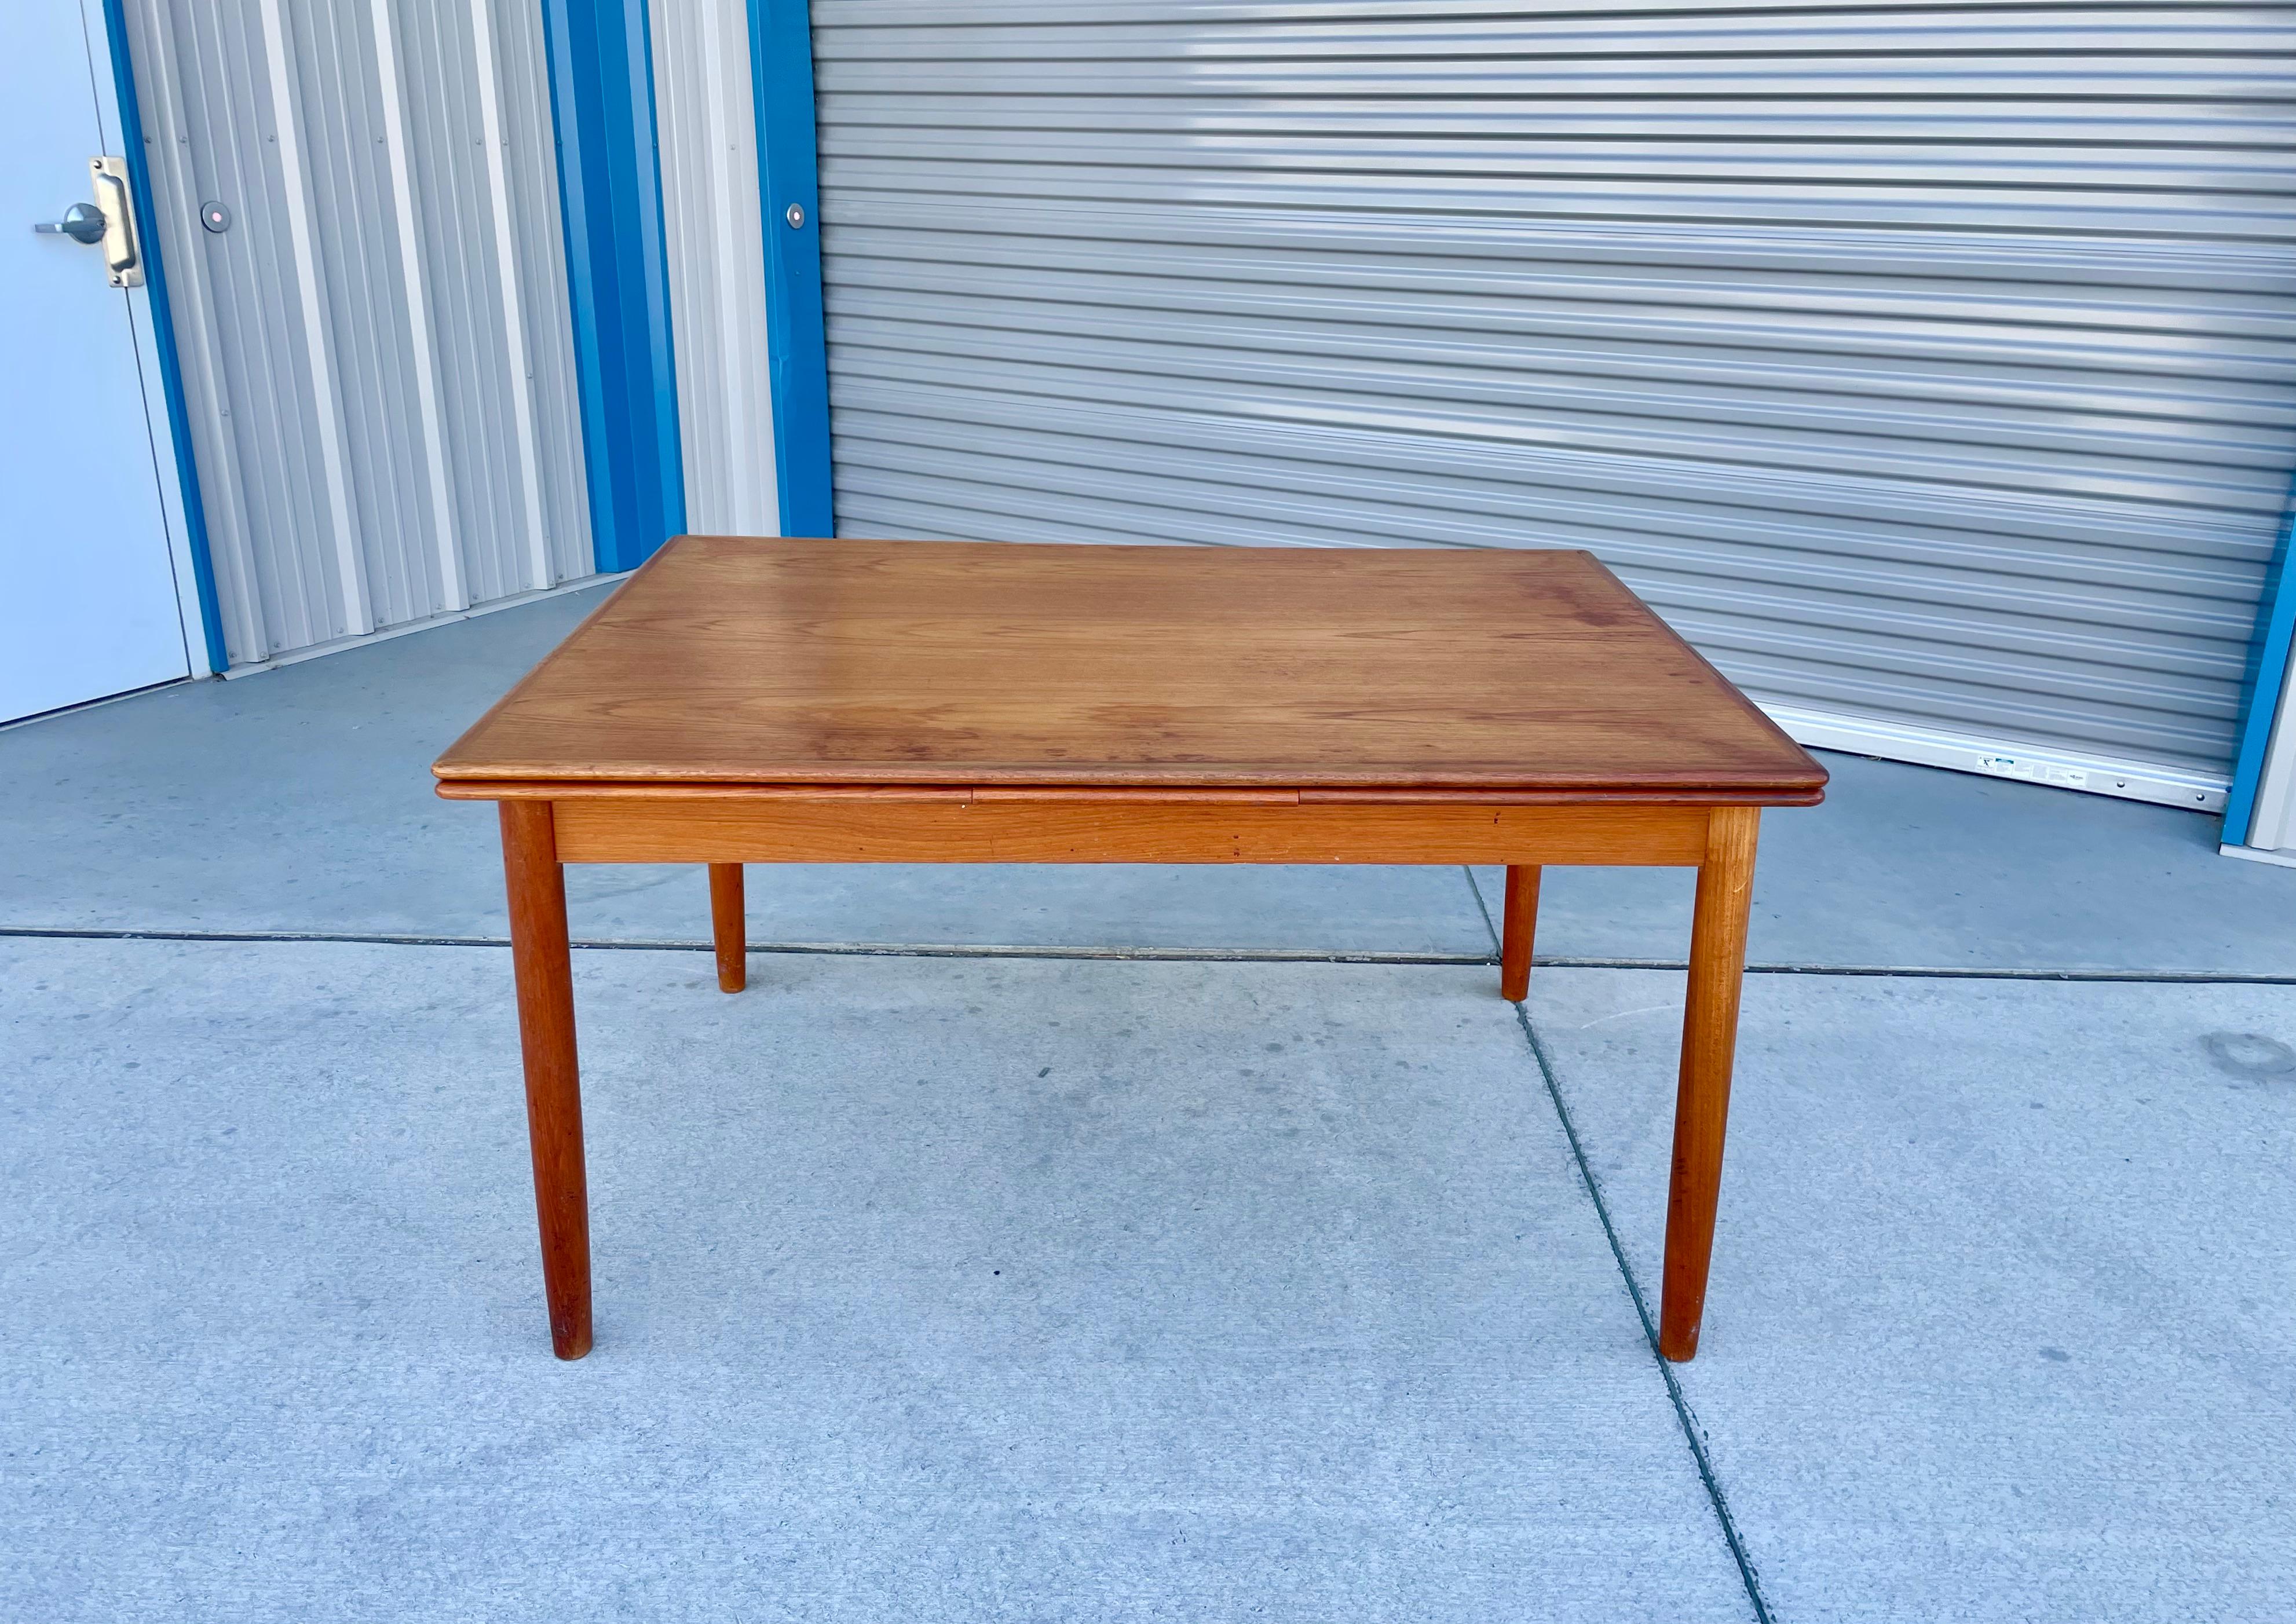 Danish Modern teak extending dining table designed and manufactured in Denmark 1960s. This beautiful dining table was made with the highest quality of teak. One of the best features of this table is that it comes with two pull-out leaves. All you